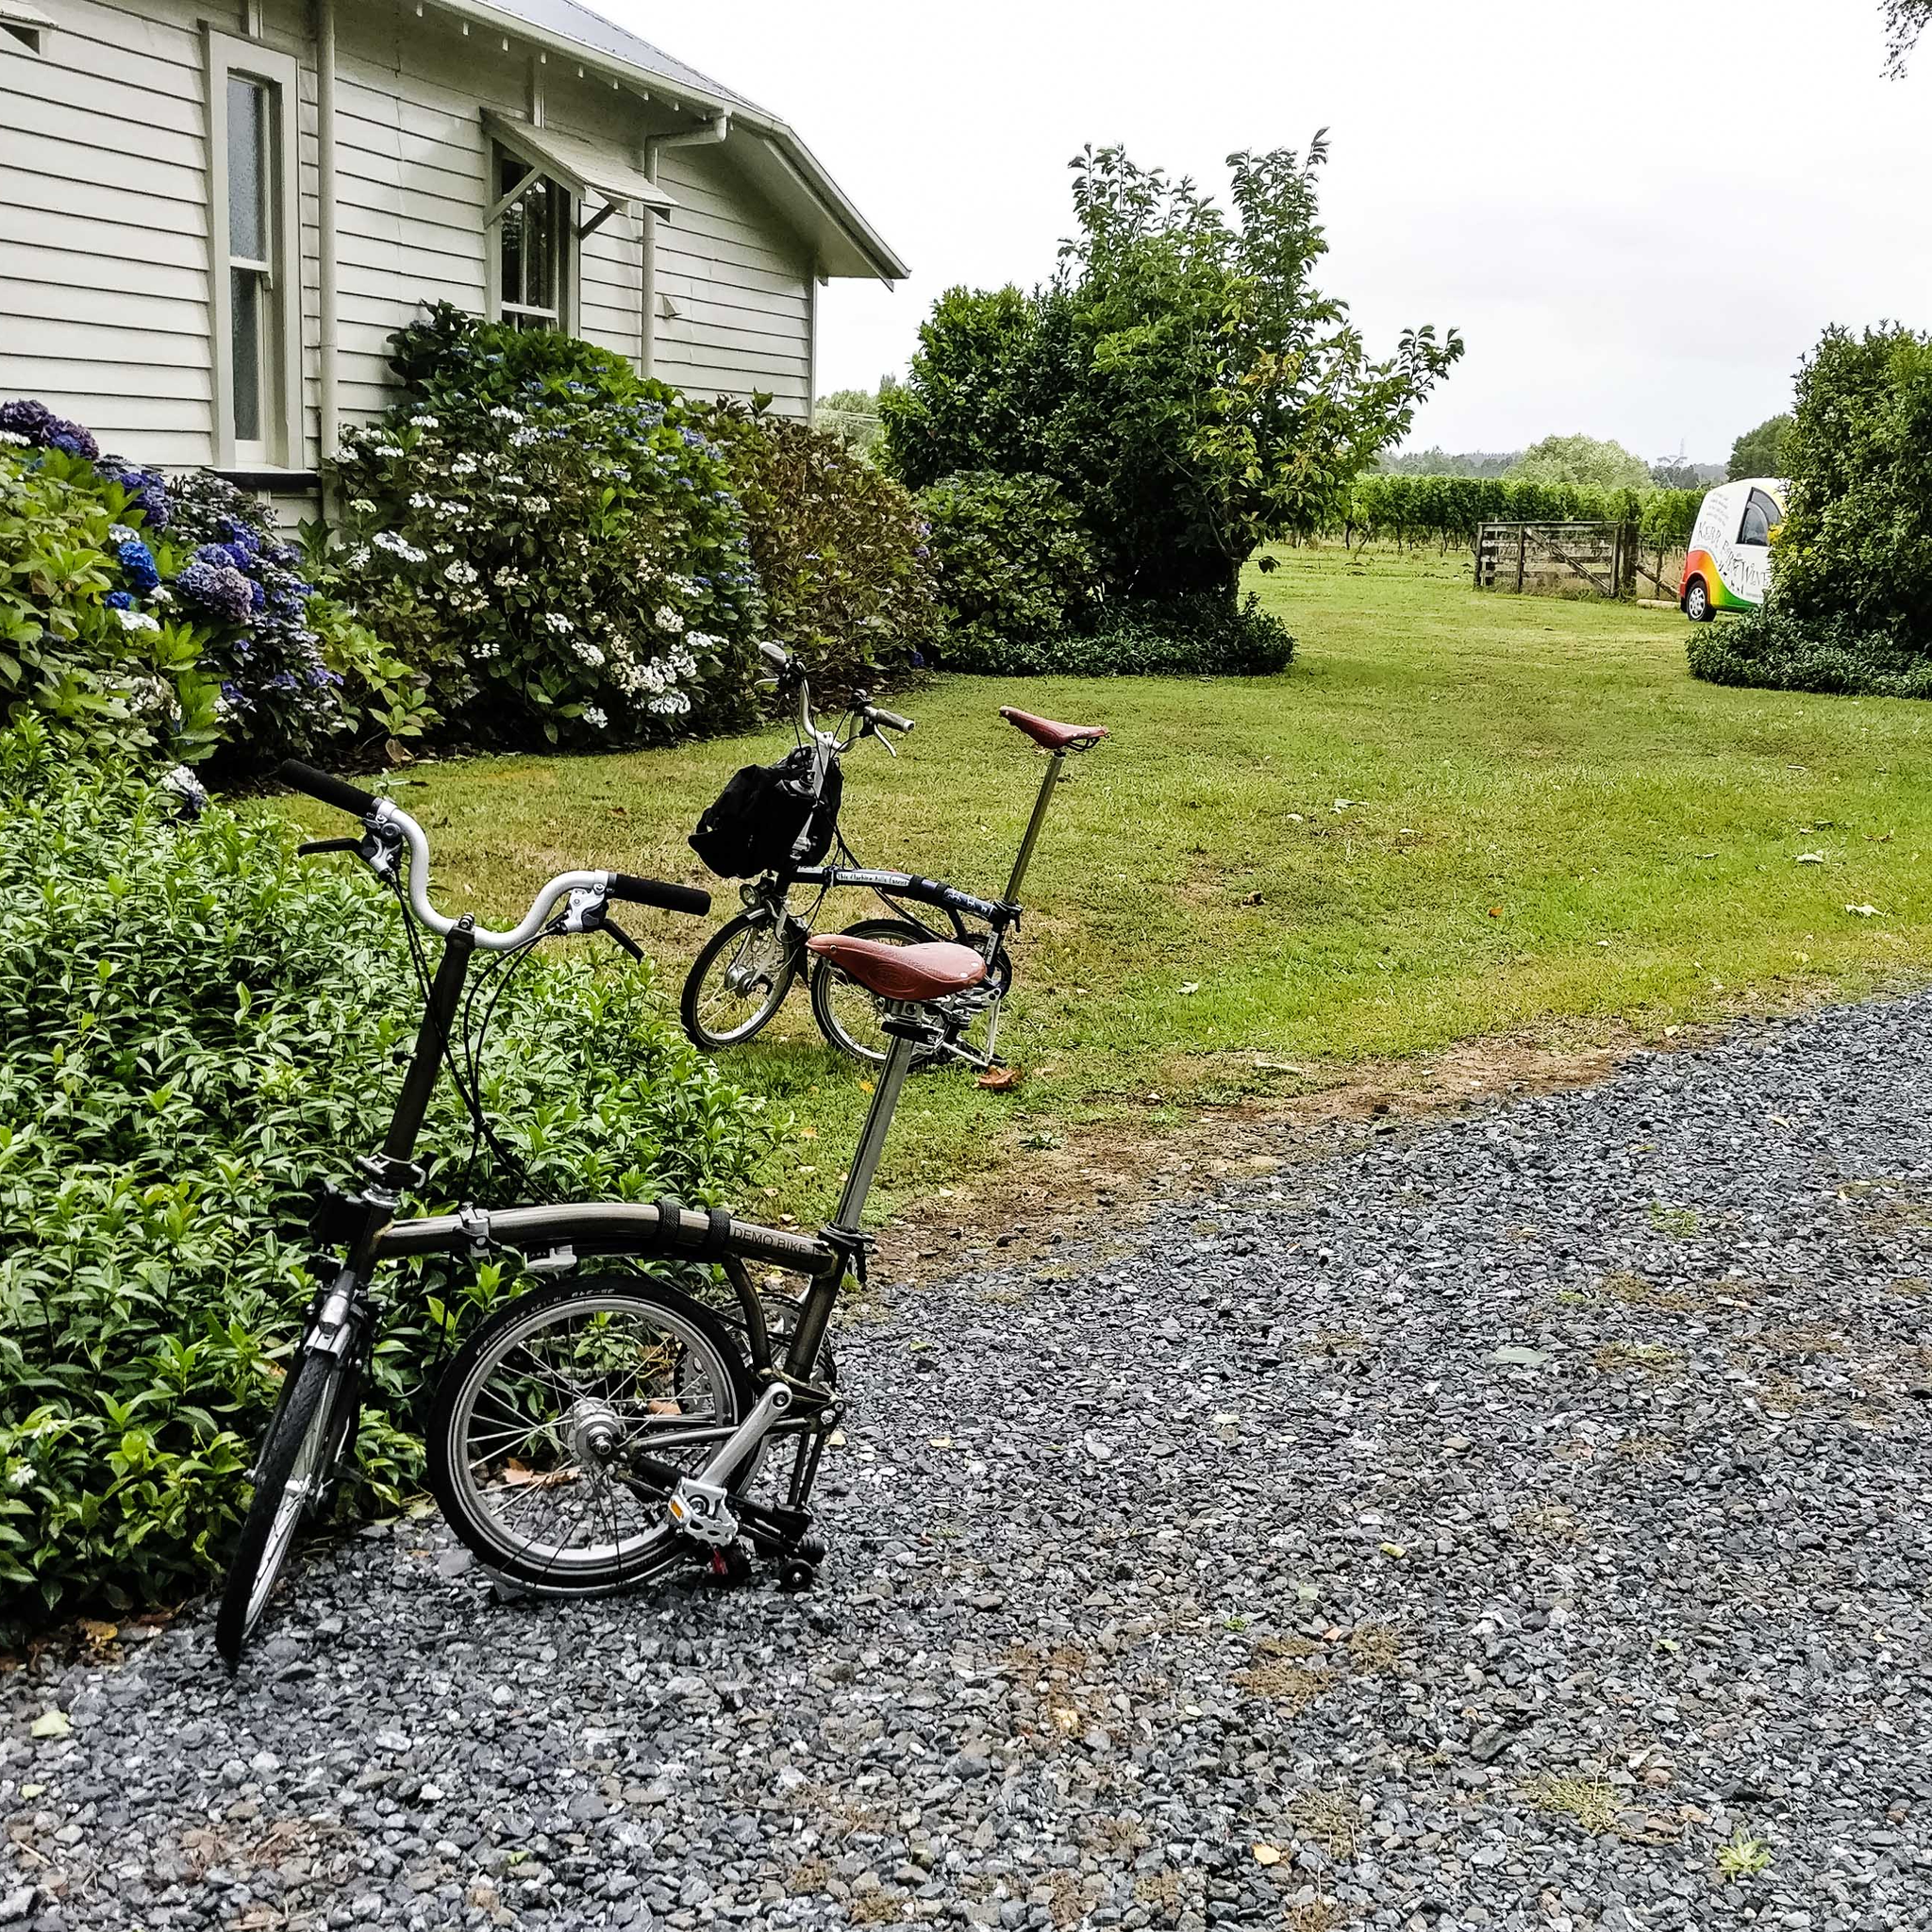 Two Bromptons on a gravel drive by a house surrounded by flowering bushes.